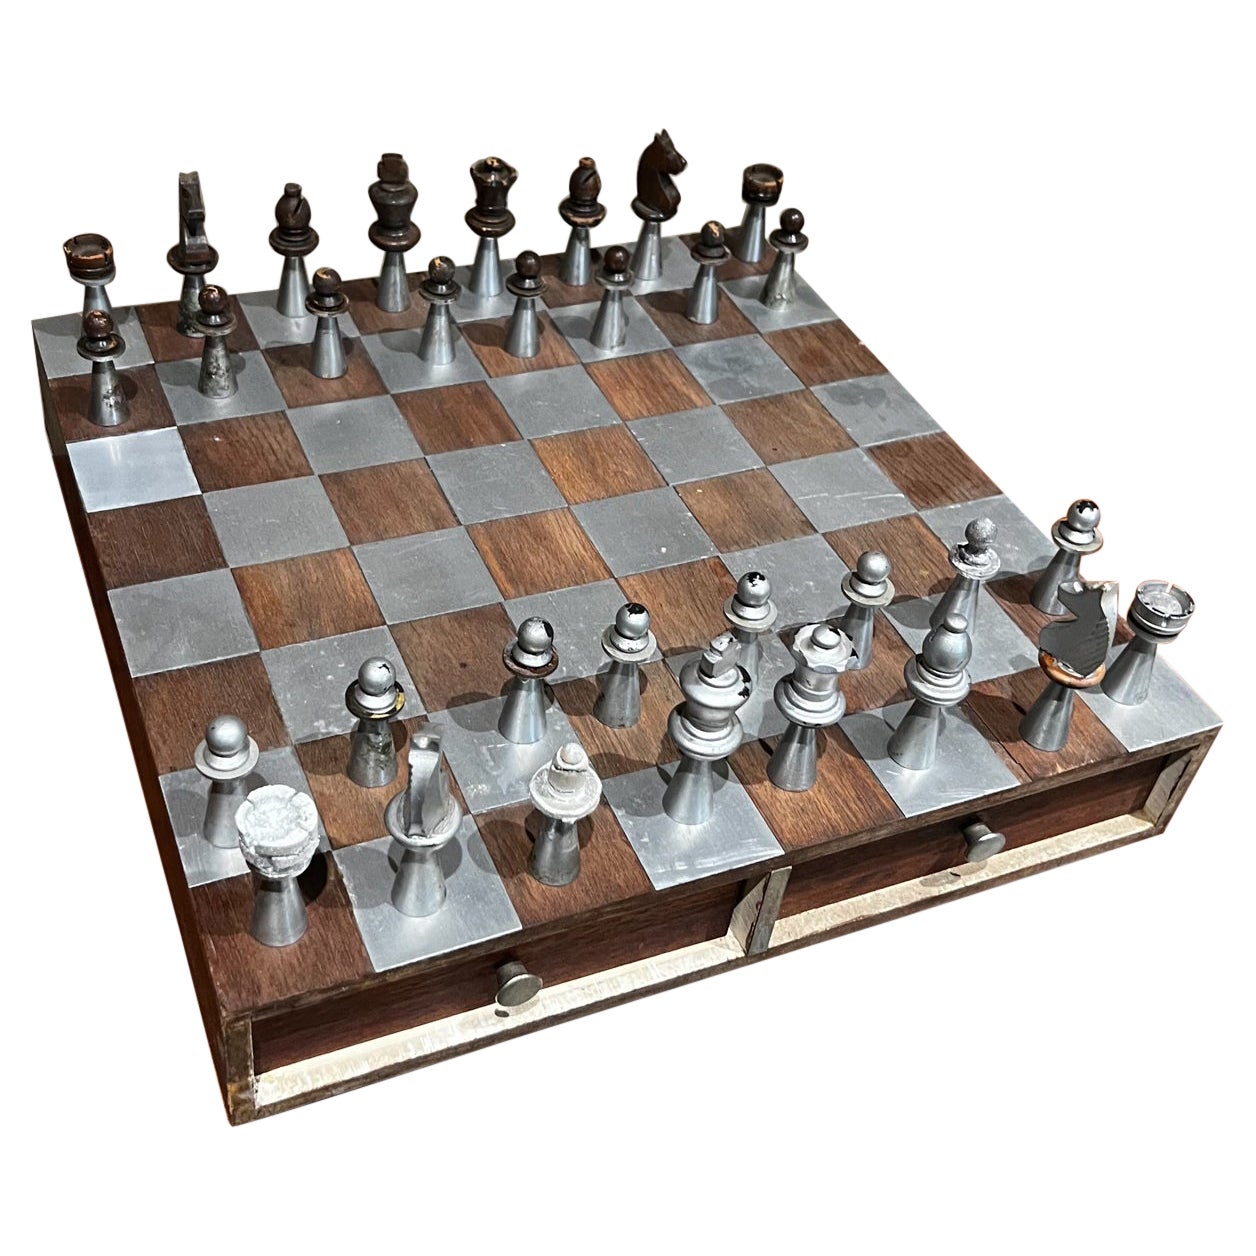 1960s Modernist Striking Chess Game Set Aluminum and Walnut Wood For Sale